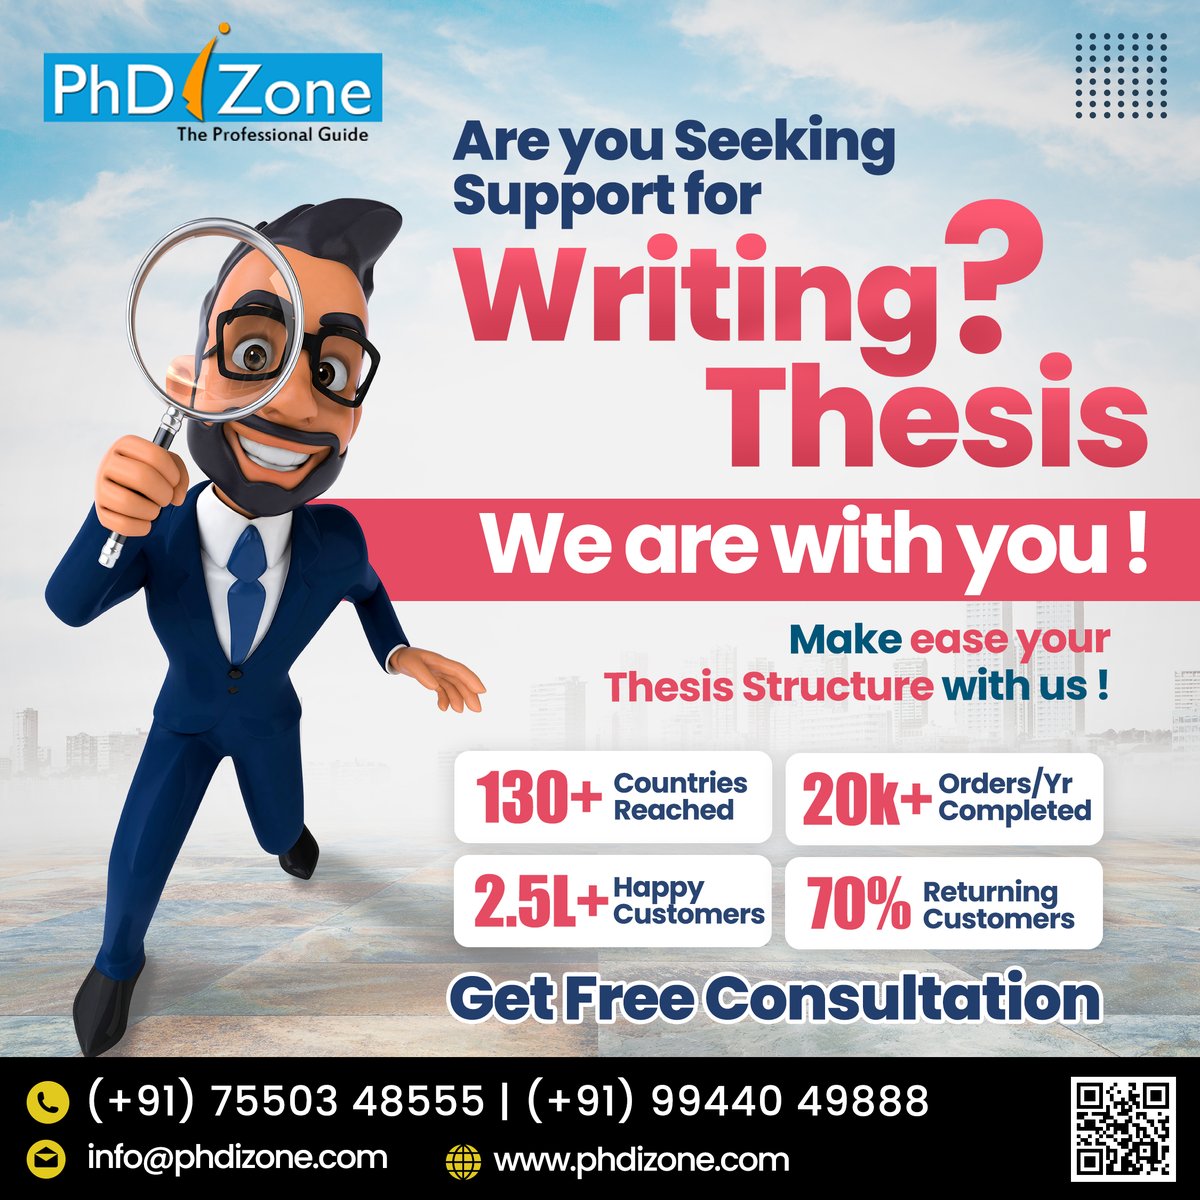 Turning ideas into words and words into knowledge 📷
Thesis writing with PhDiZone📷

#Phdizone #phdstudent #phdjourney #phdproblems #bookwriters #ebookwriter #manuscriptwriting #paperwriters #thesiswriting #thesiswritinghelp #thesiswritingservices #writingservices #Thesiswriter